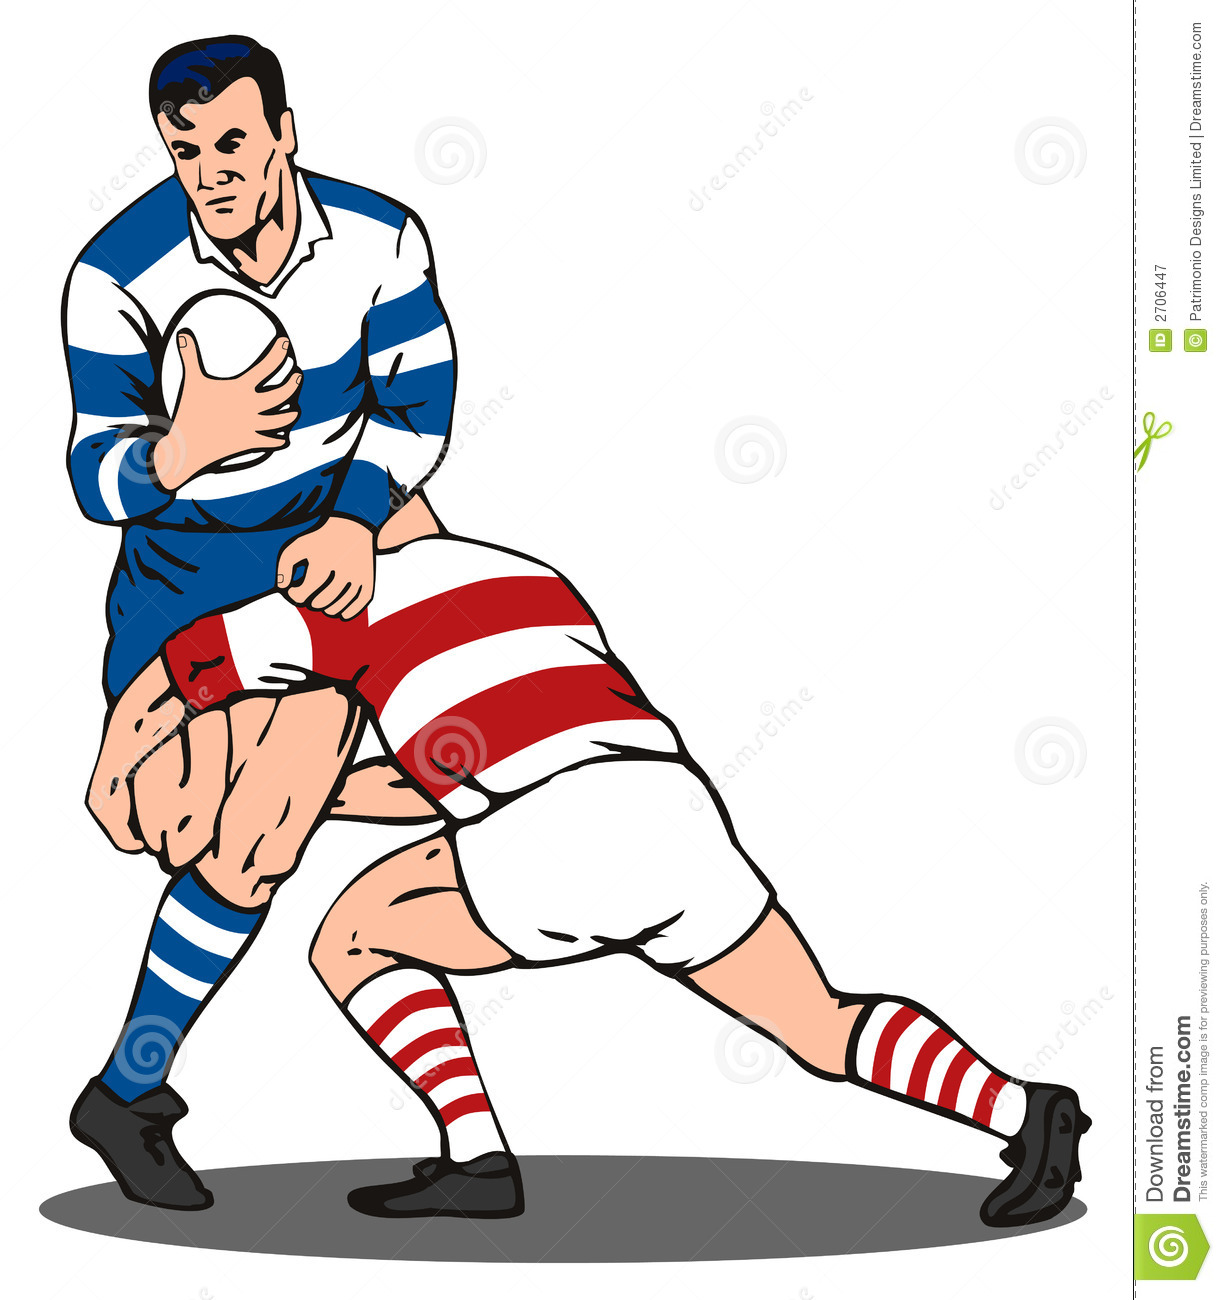 Rugby Player Tackling Royalty Free Stock Photography   Image  2706447